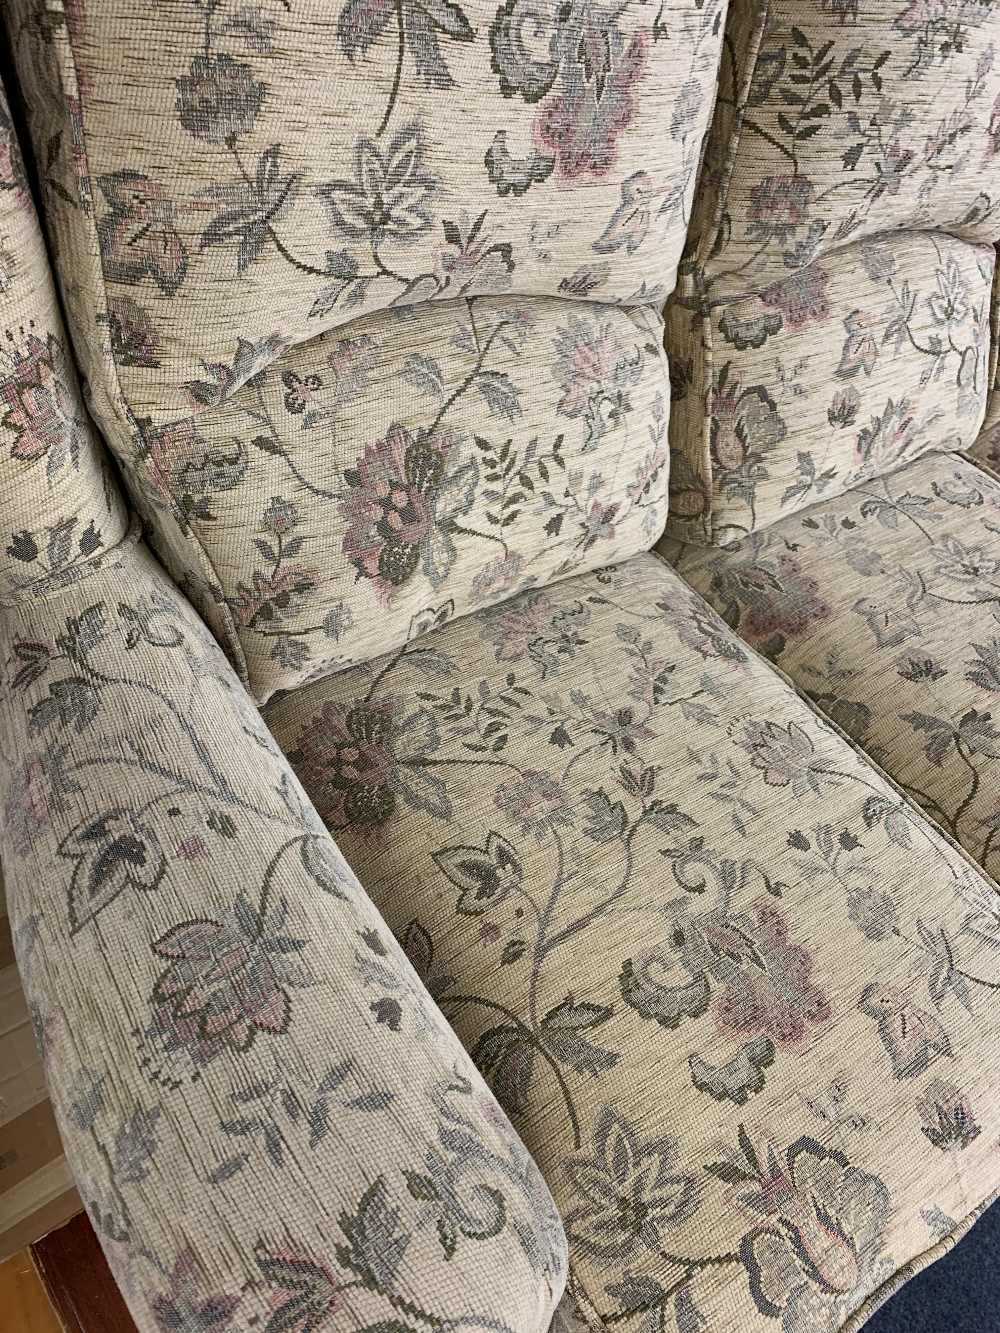 RUTLAND THREE SEATER SOFA in natural floral pattern, 102cms H, 180cms W, 90cms D overall - Image 3 of 4